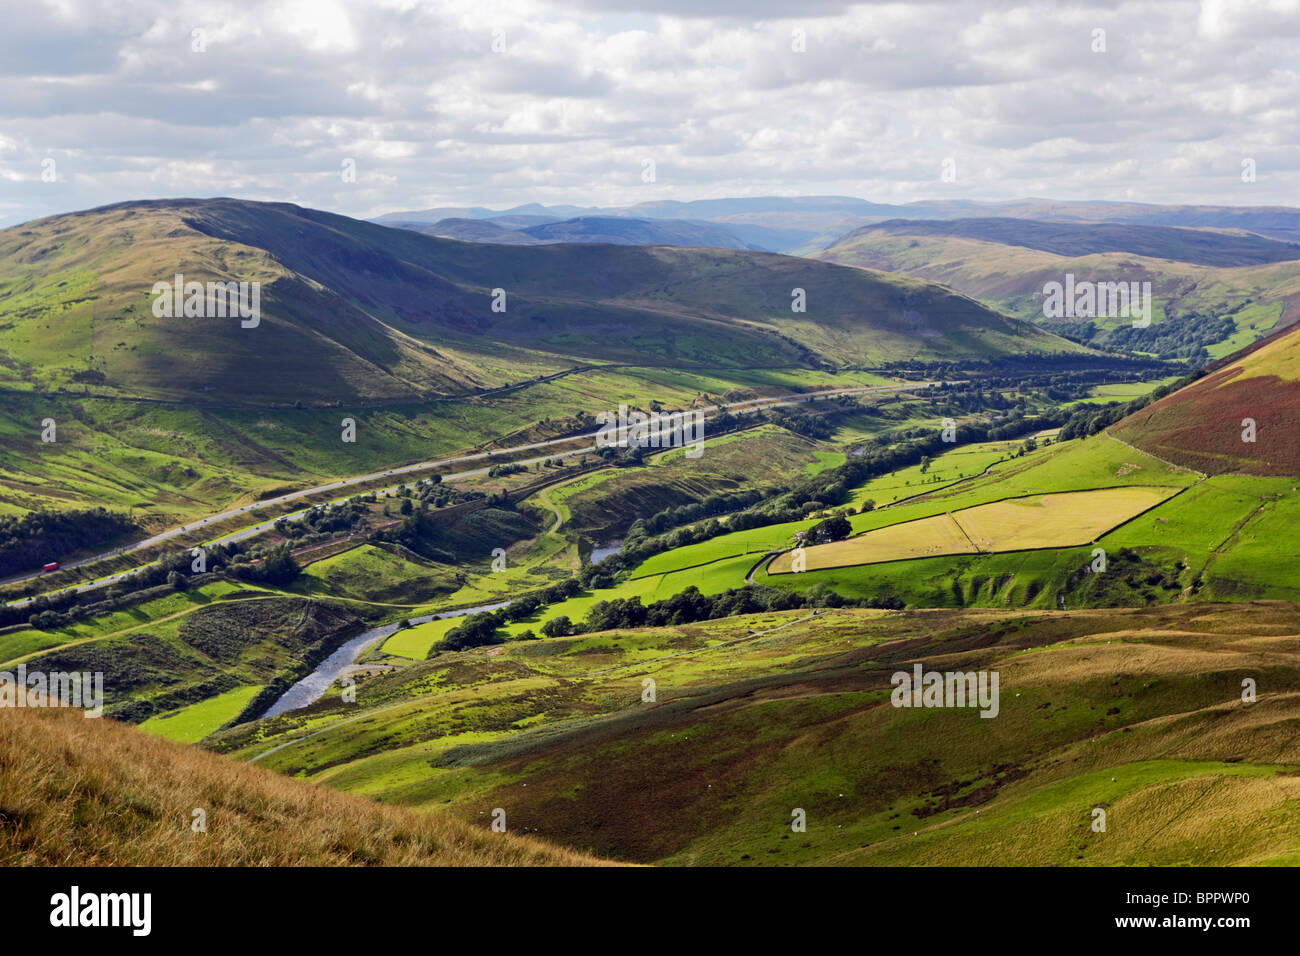 The River Lune and Carlingill in the Howgills from Linghaw in the Yorkshire Dales National Park, Cumbria, England. Stock Photo